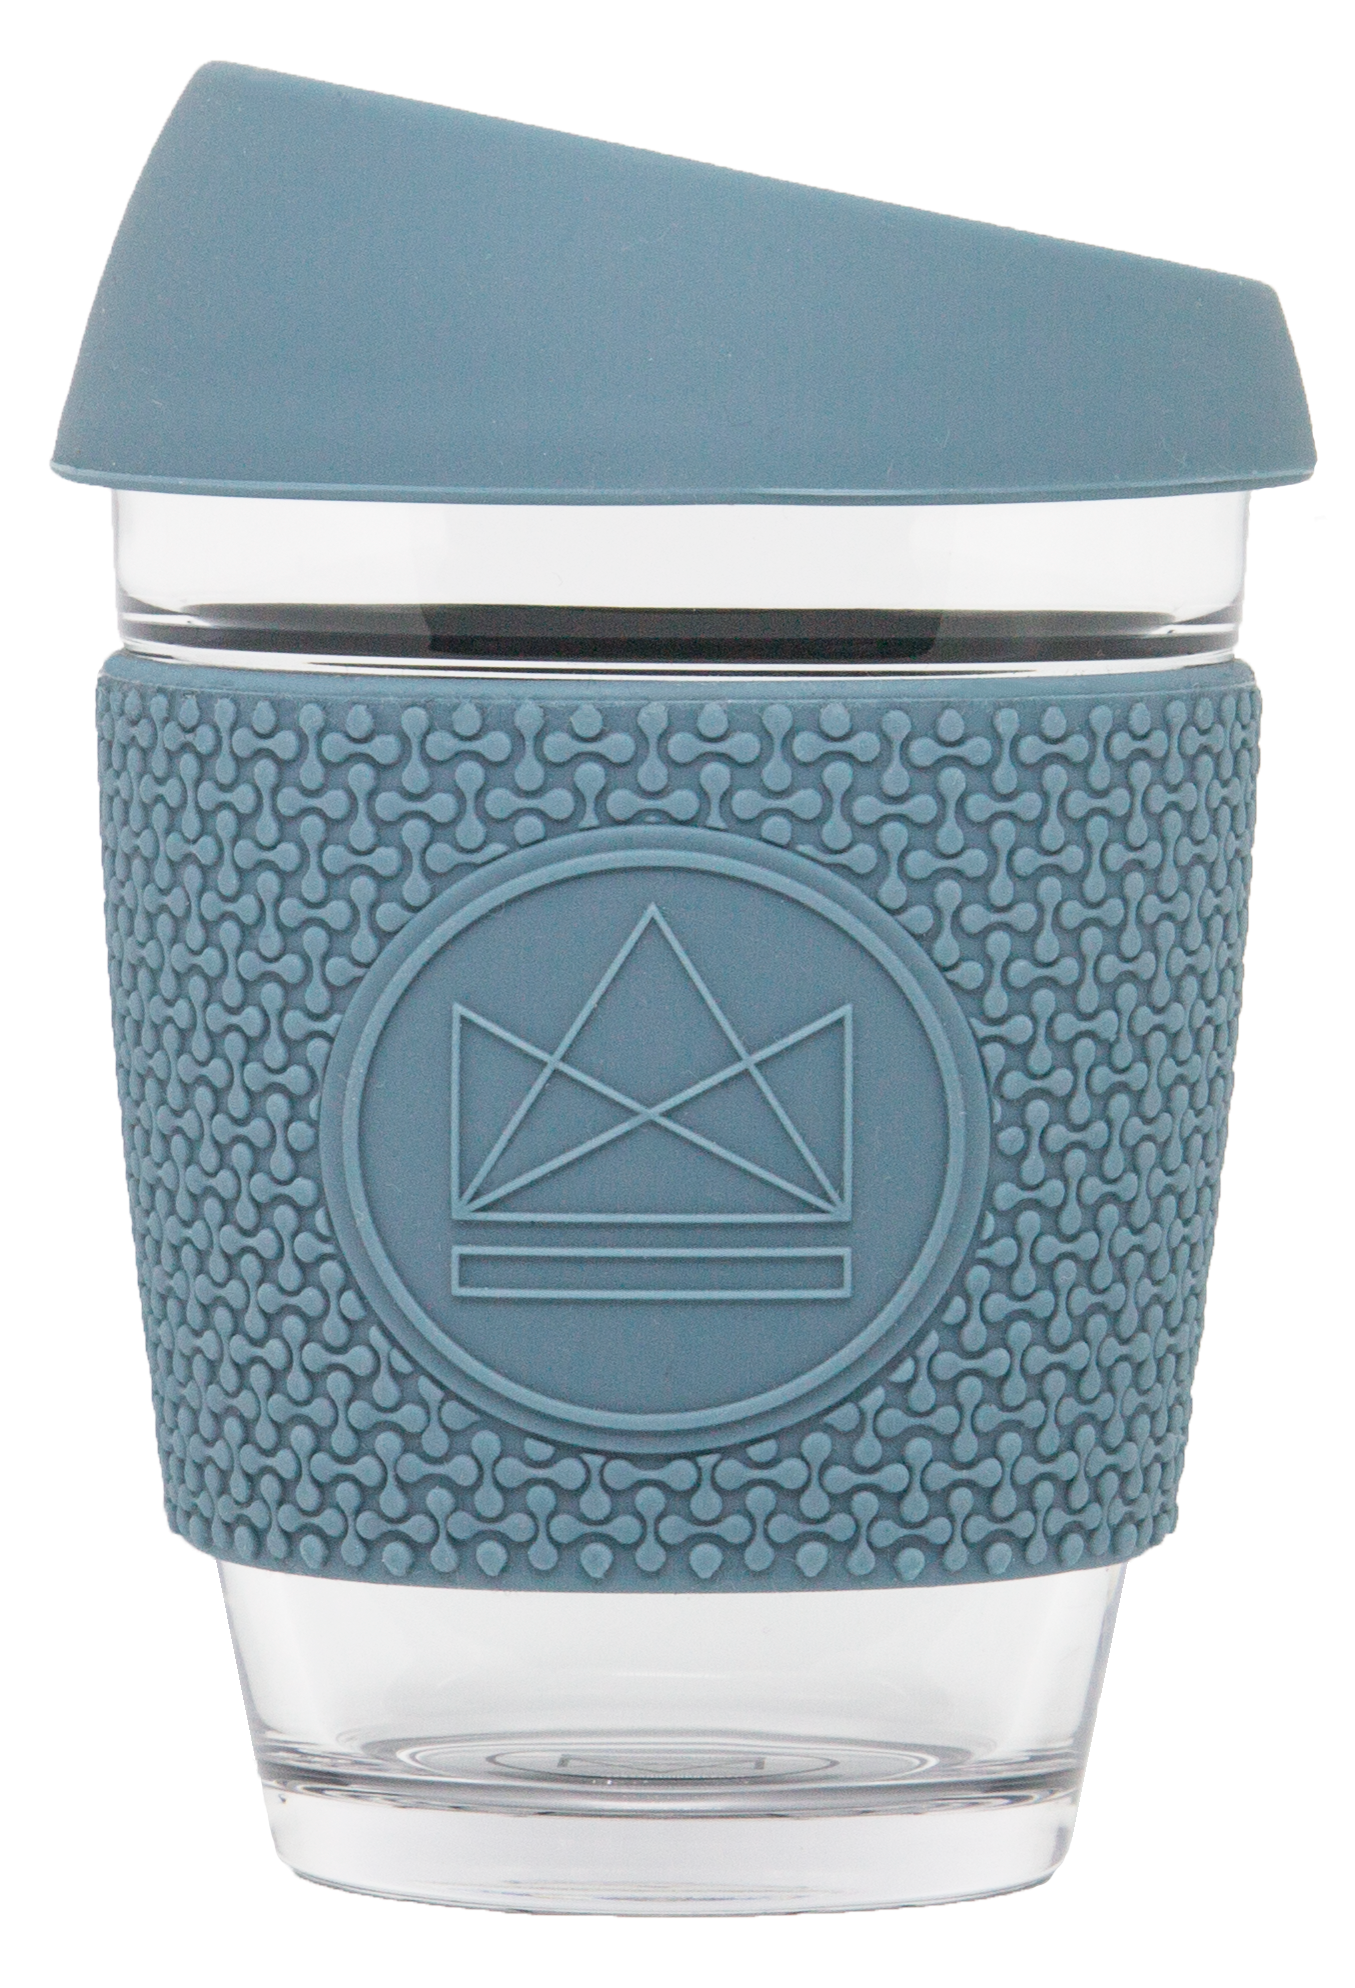 Neon Kactus Reusable Glass Coffee Cup With Thermal Sleeve 12oz - Sonic Blue